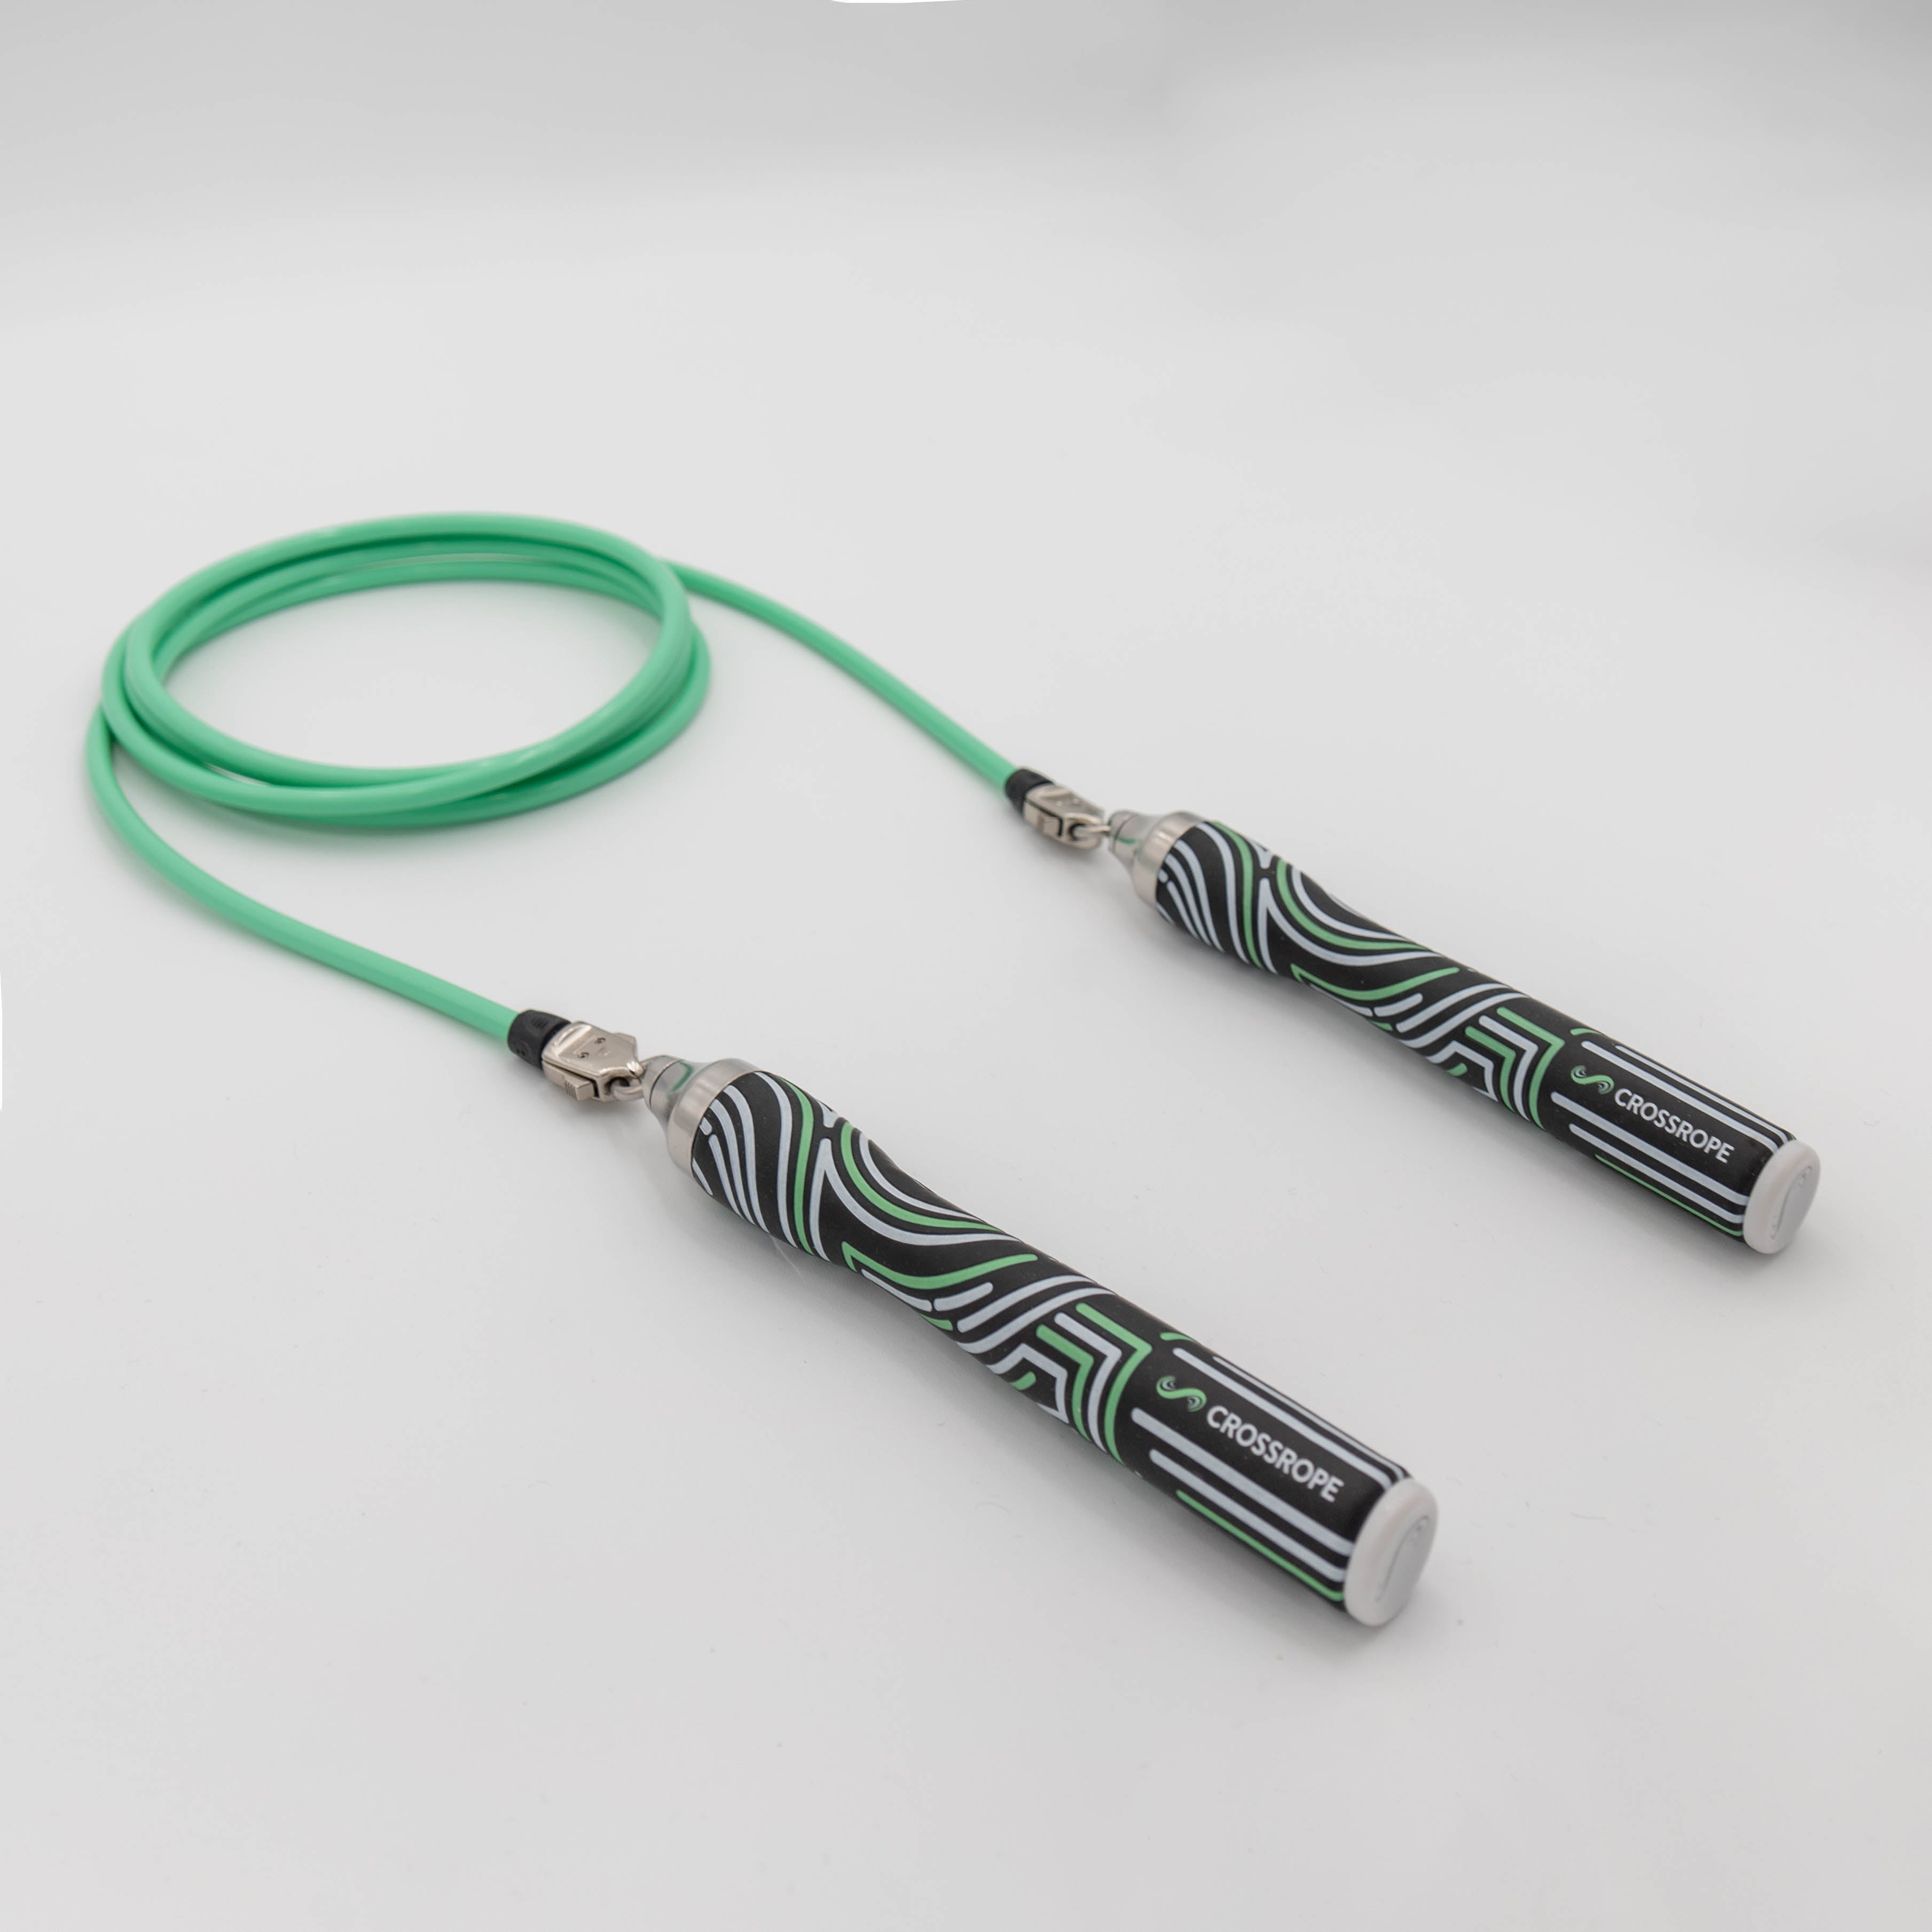 Starter Jump Rope Set A coiled view of the 1/4 LB rope with the 2023 Slim Handles